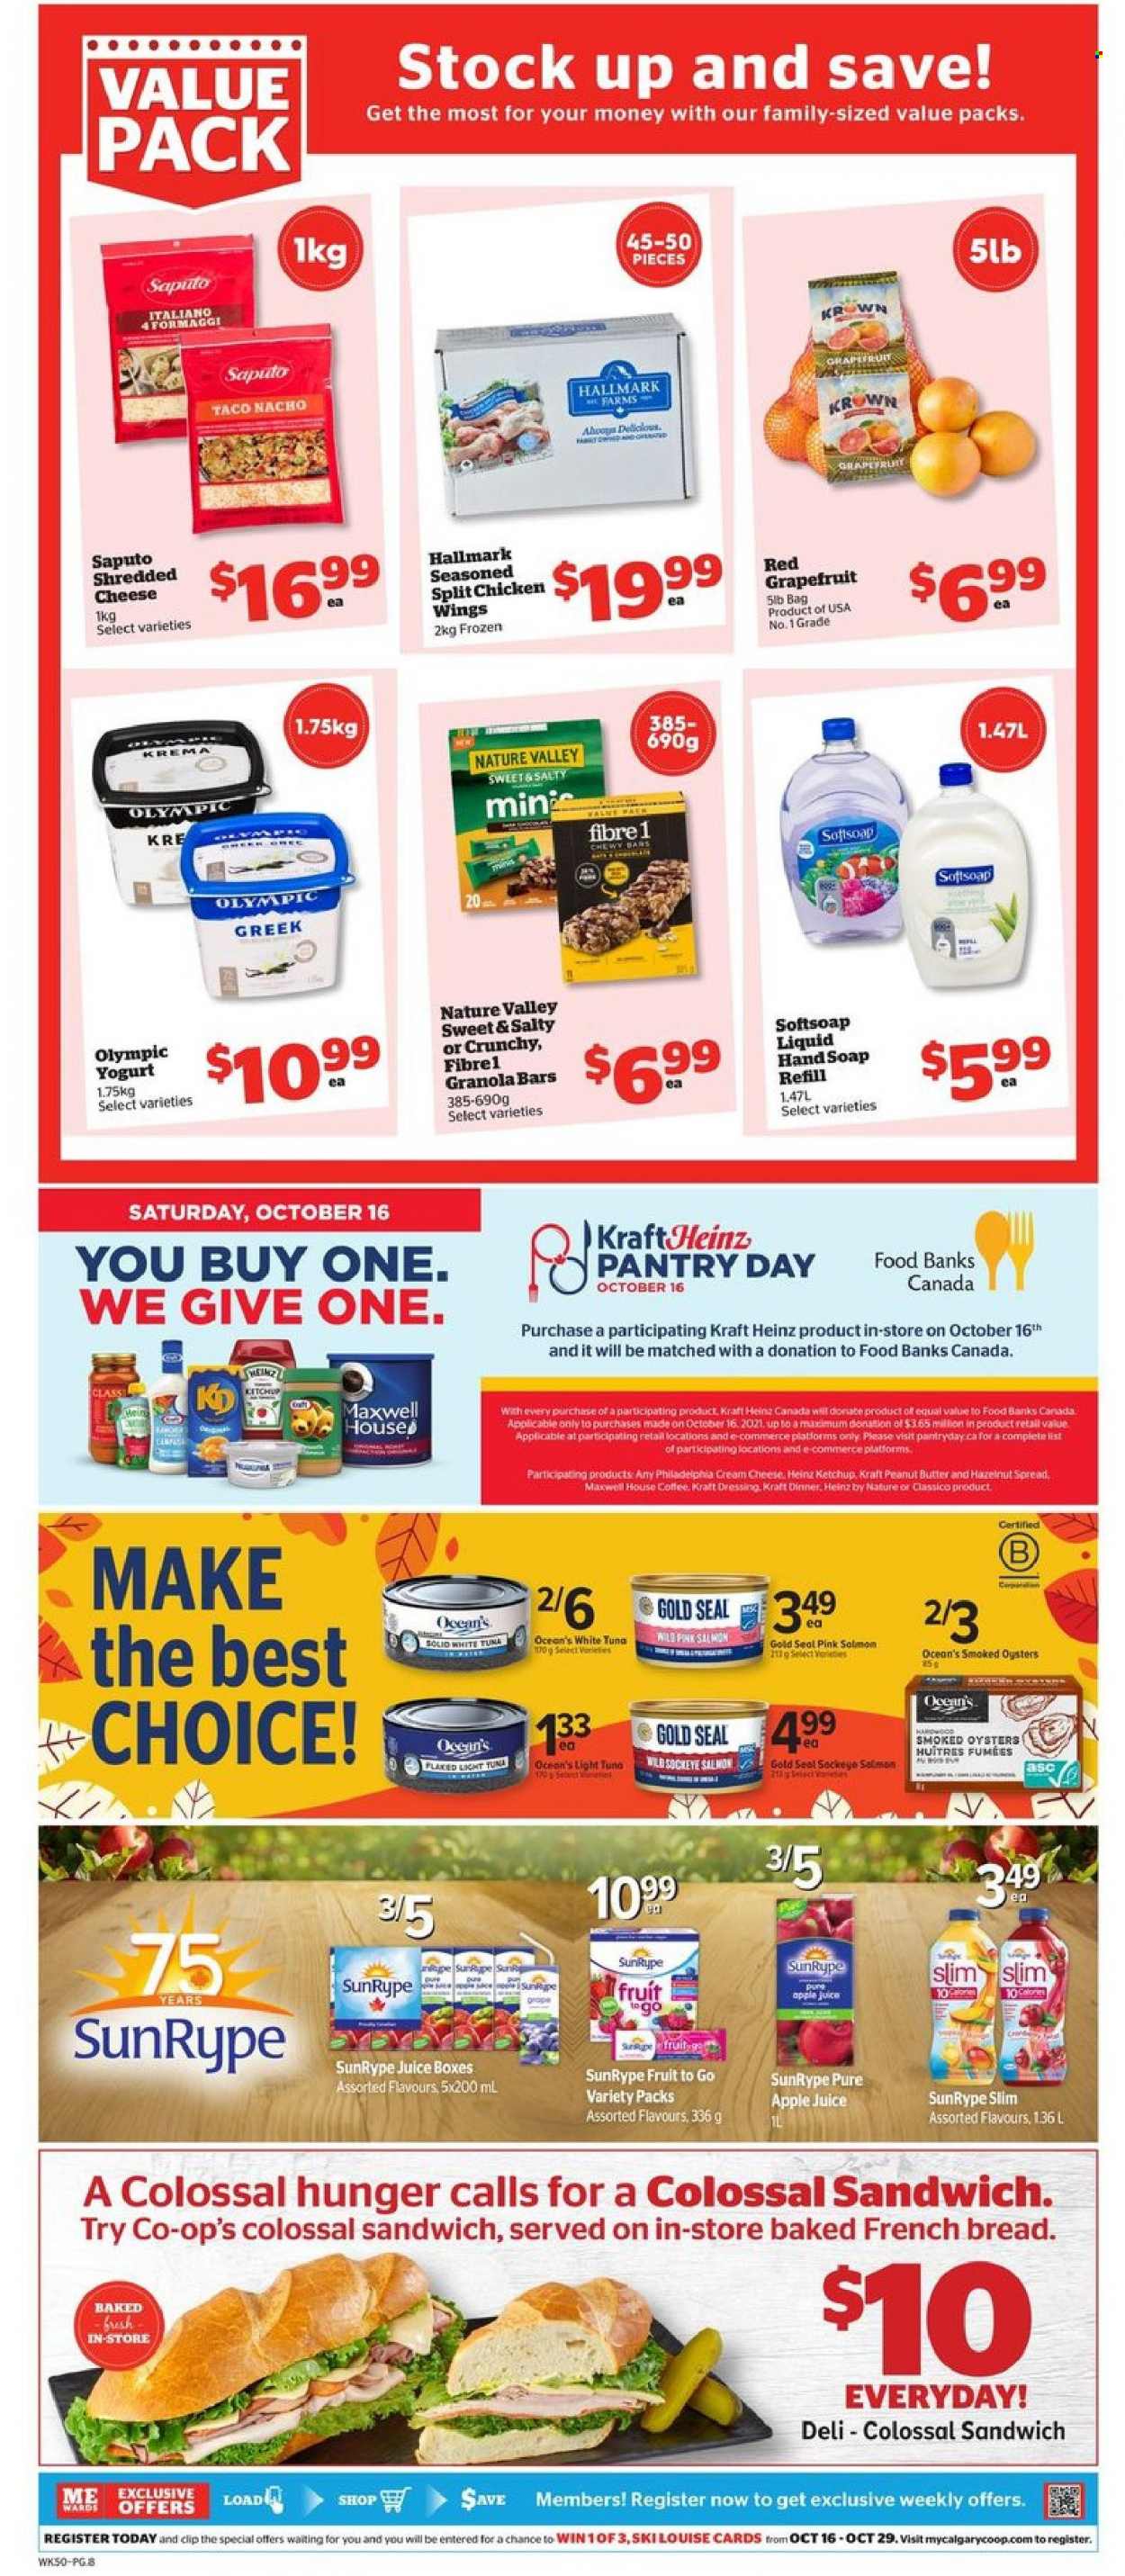 thumbnail - Calgary Co-op Flyer - October 14, 2021 - October 20, 2021 - Sales products - bread, french bread, grapefruits, salmon, smoked oysters, tuna, oysters, sandwich, Kraft®, ready meal, cream cheese, shredded cheese, yoghurt, chicken wings, fruit snack, bars, canned tuna, light tuna, canned fish, granola bar, Nature Valley, ketchup, peanut butter, hazelnut spread, apple juice, juice, Maxwell House, coffee, baby snack, chicken, Softsoap, hand soap, soap, Heinz, Philadelphia. Page 10.